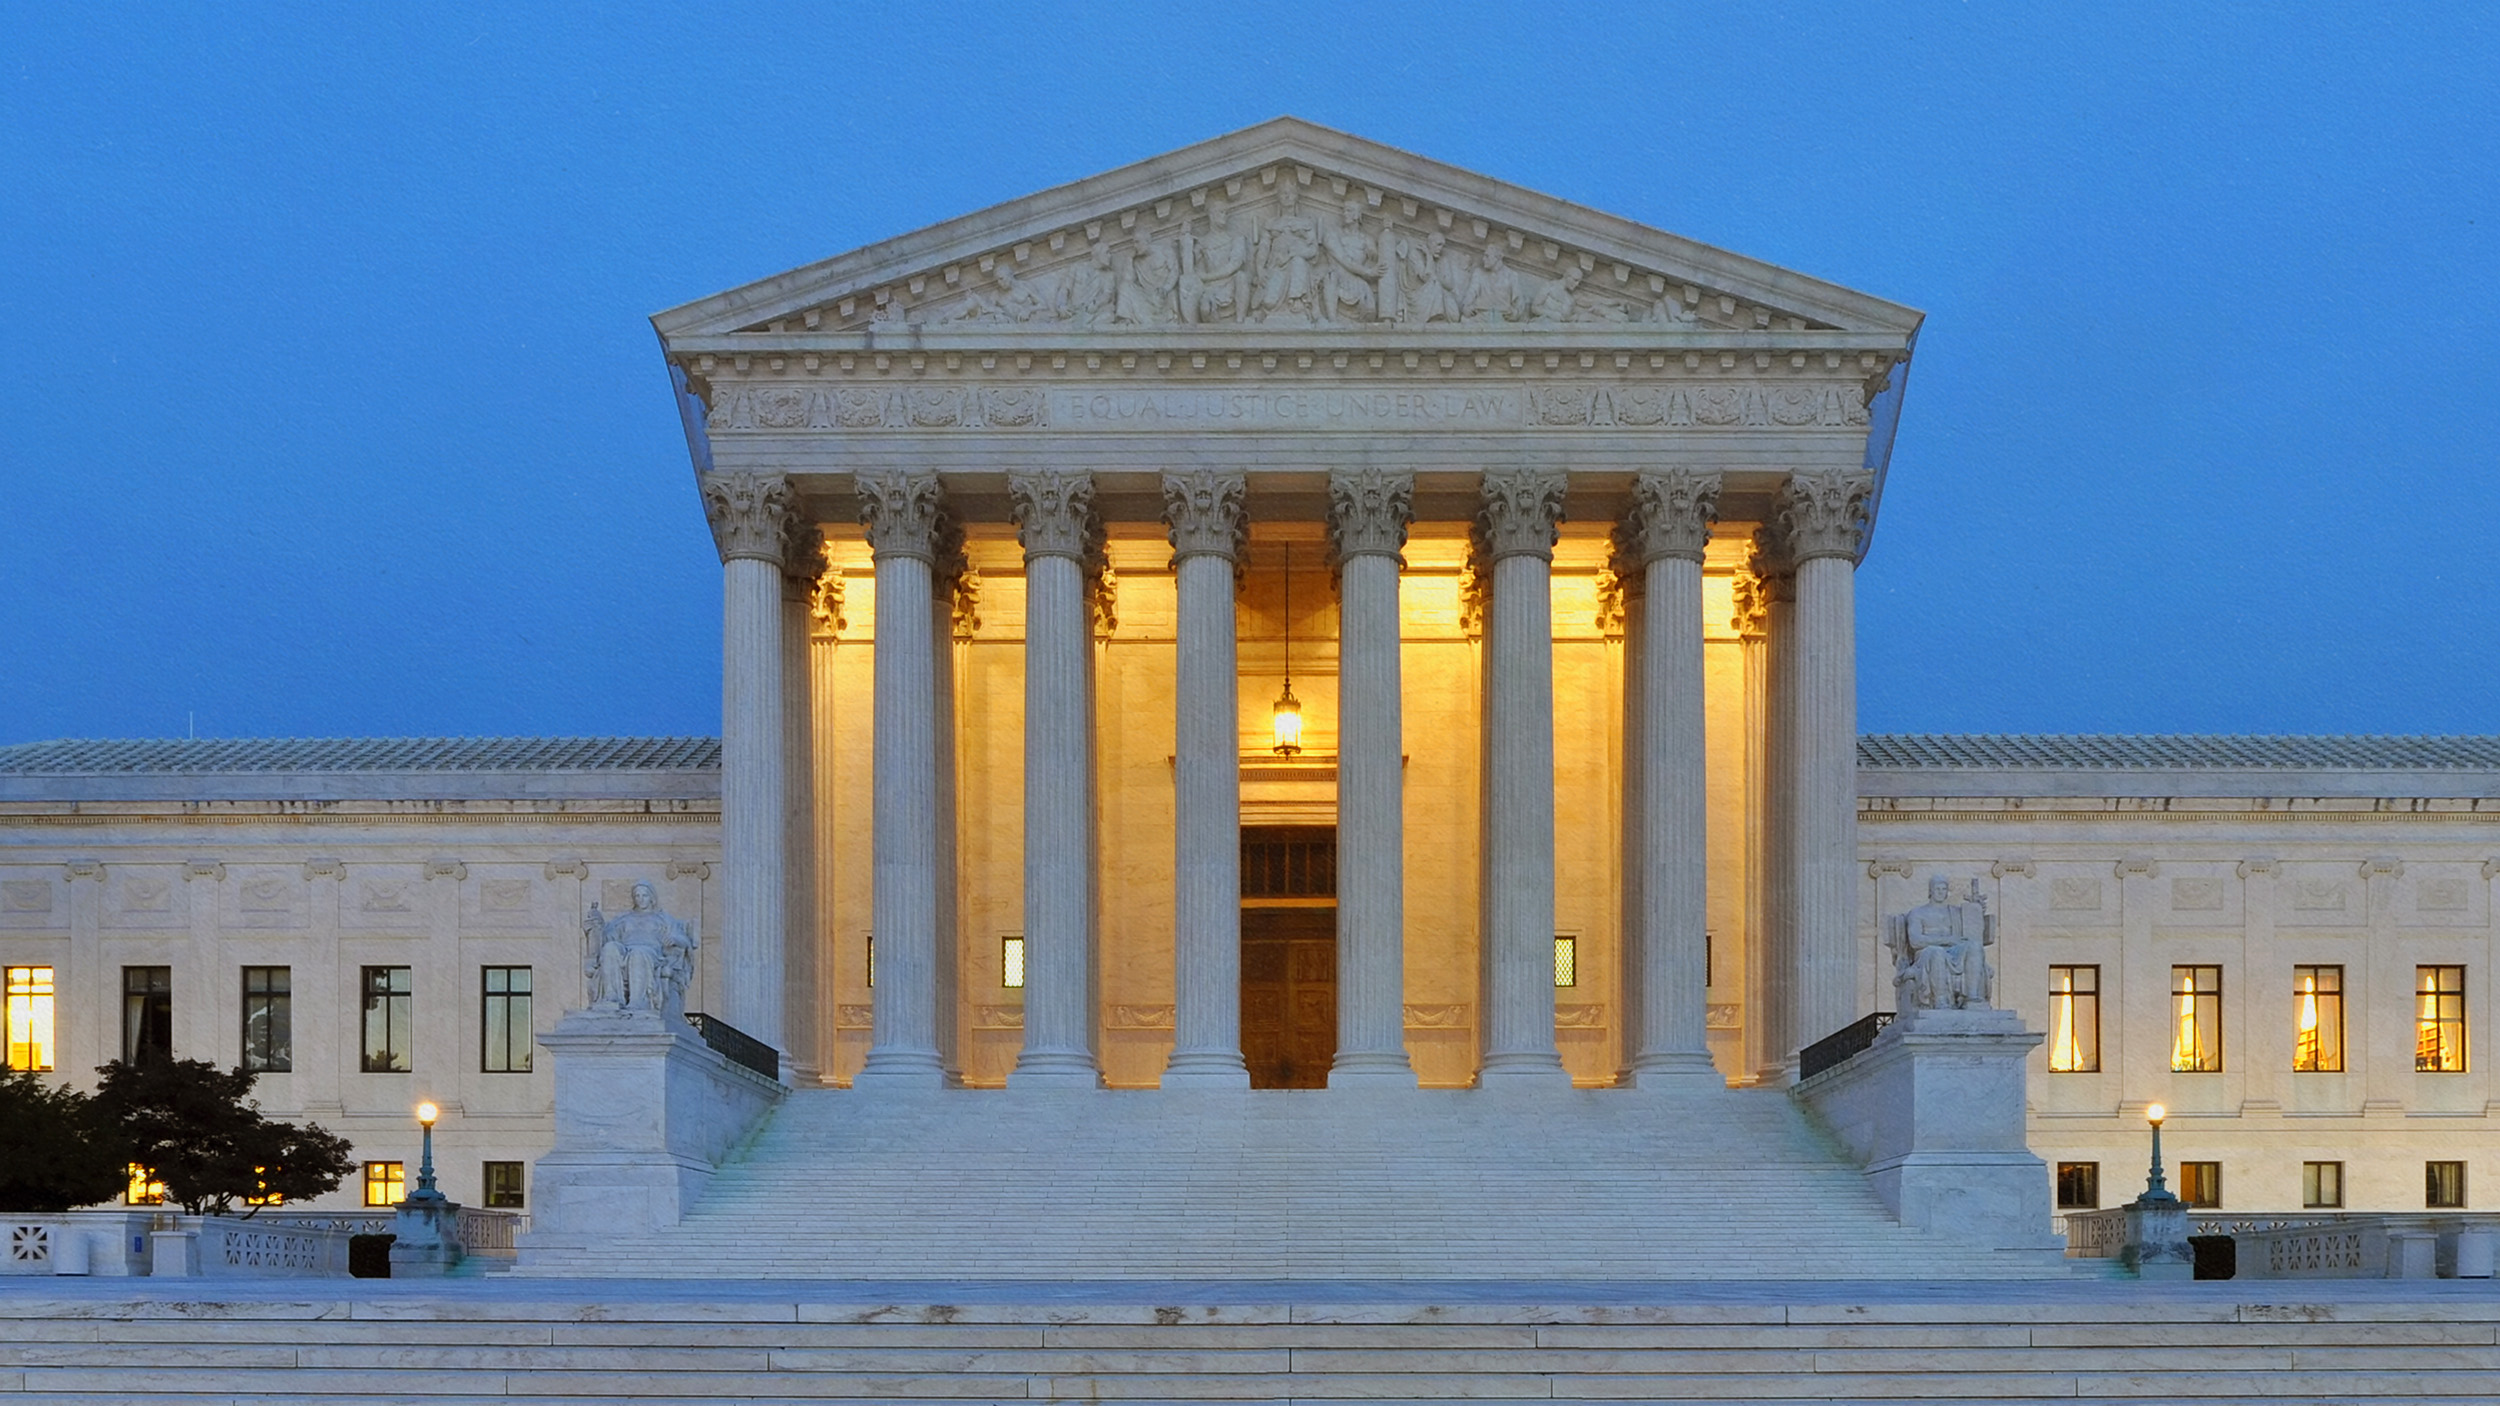 The United States Supreme Court building, a neoclassical structure with tall columns.